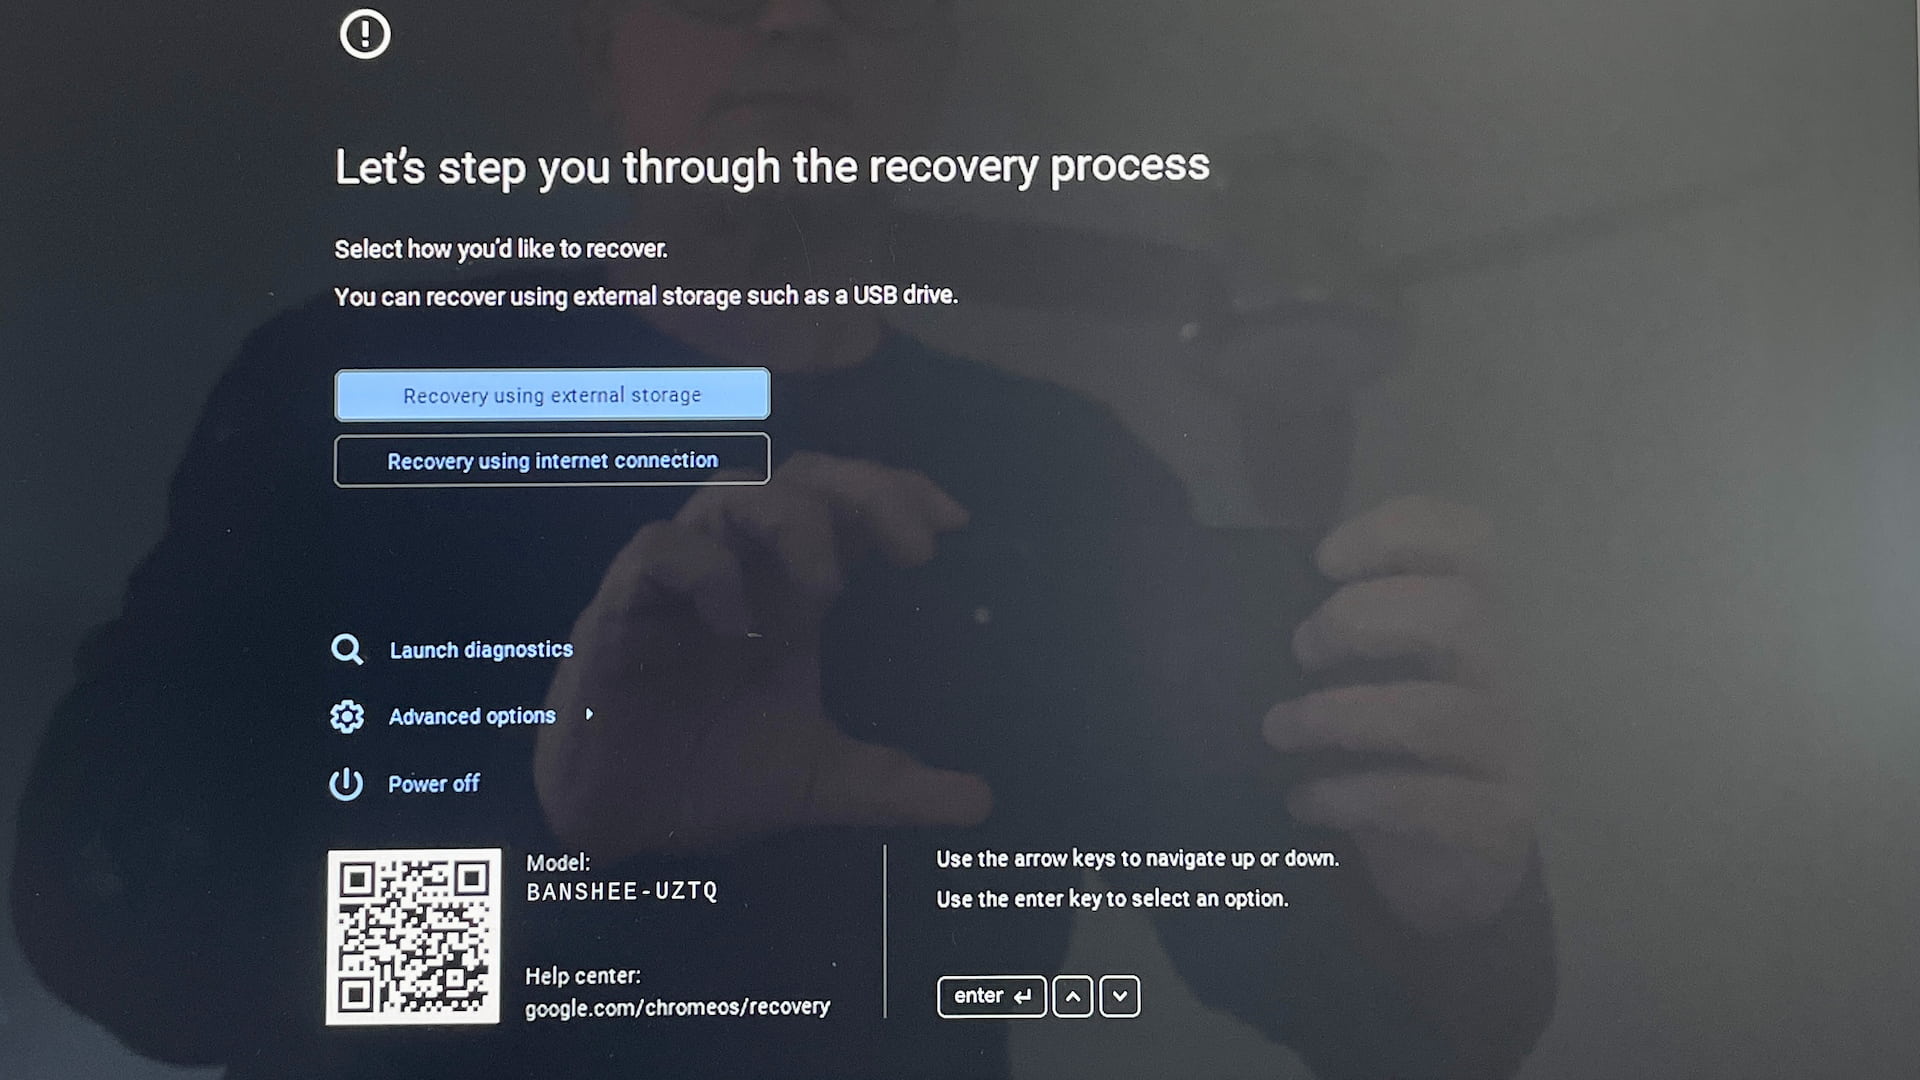 How to use network-based Chromebook recovery